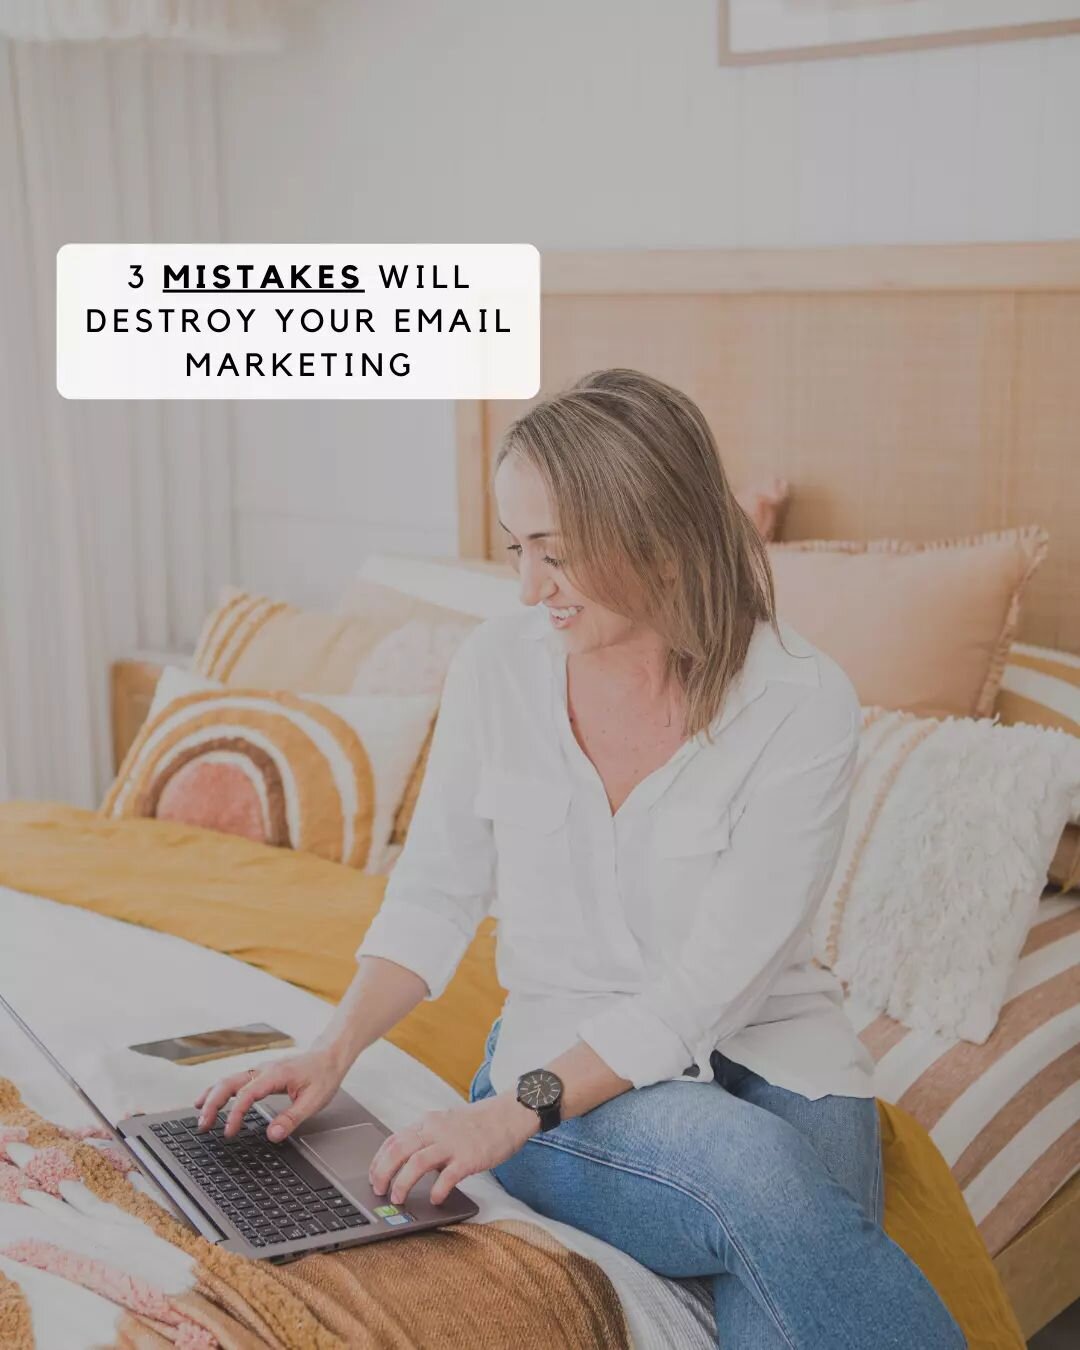 You've been warned! Here are the top red flags that destroy your email marketing in a heartbeat&nbsp;🙅♀️ 

🚩 Blasting to your entire list.
While it&rsquo;s tempting to send a campaign to as many customers as possible, this will kill your deliverabi